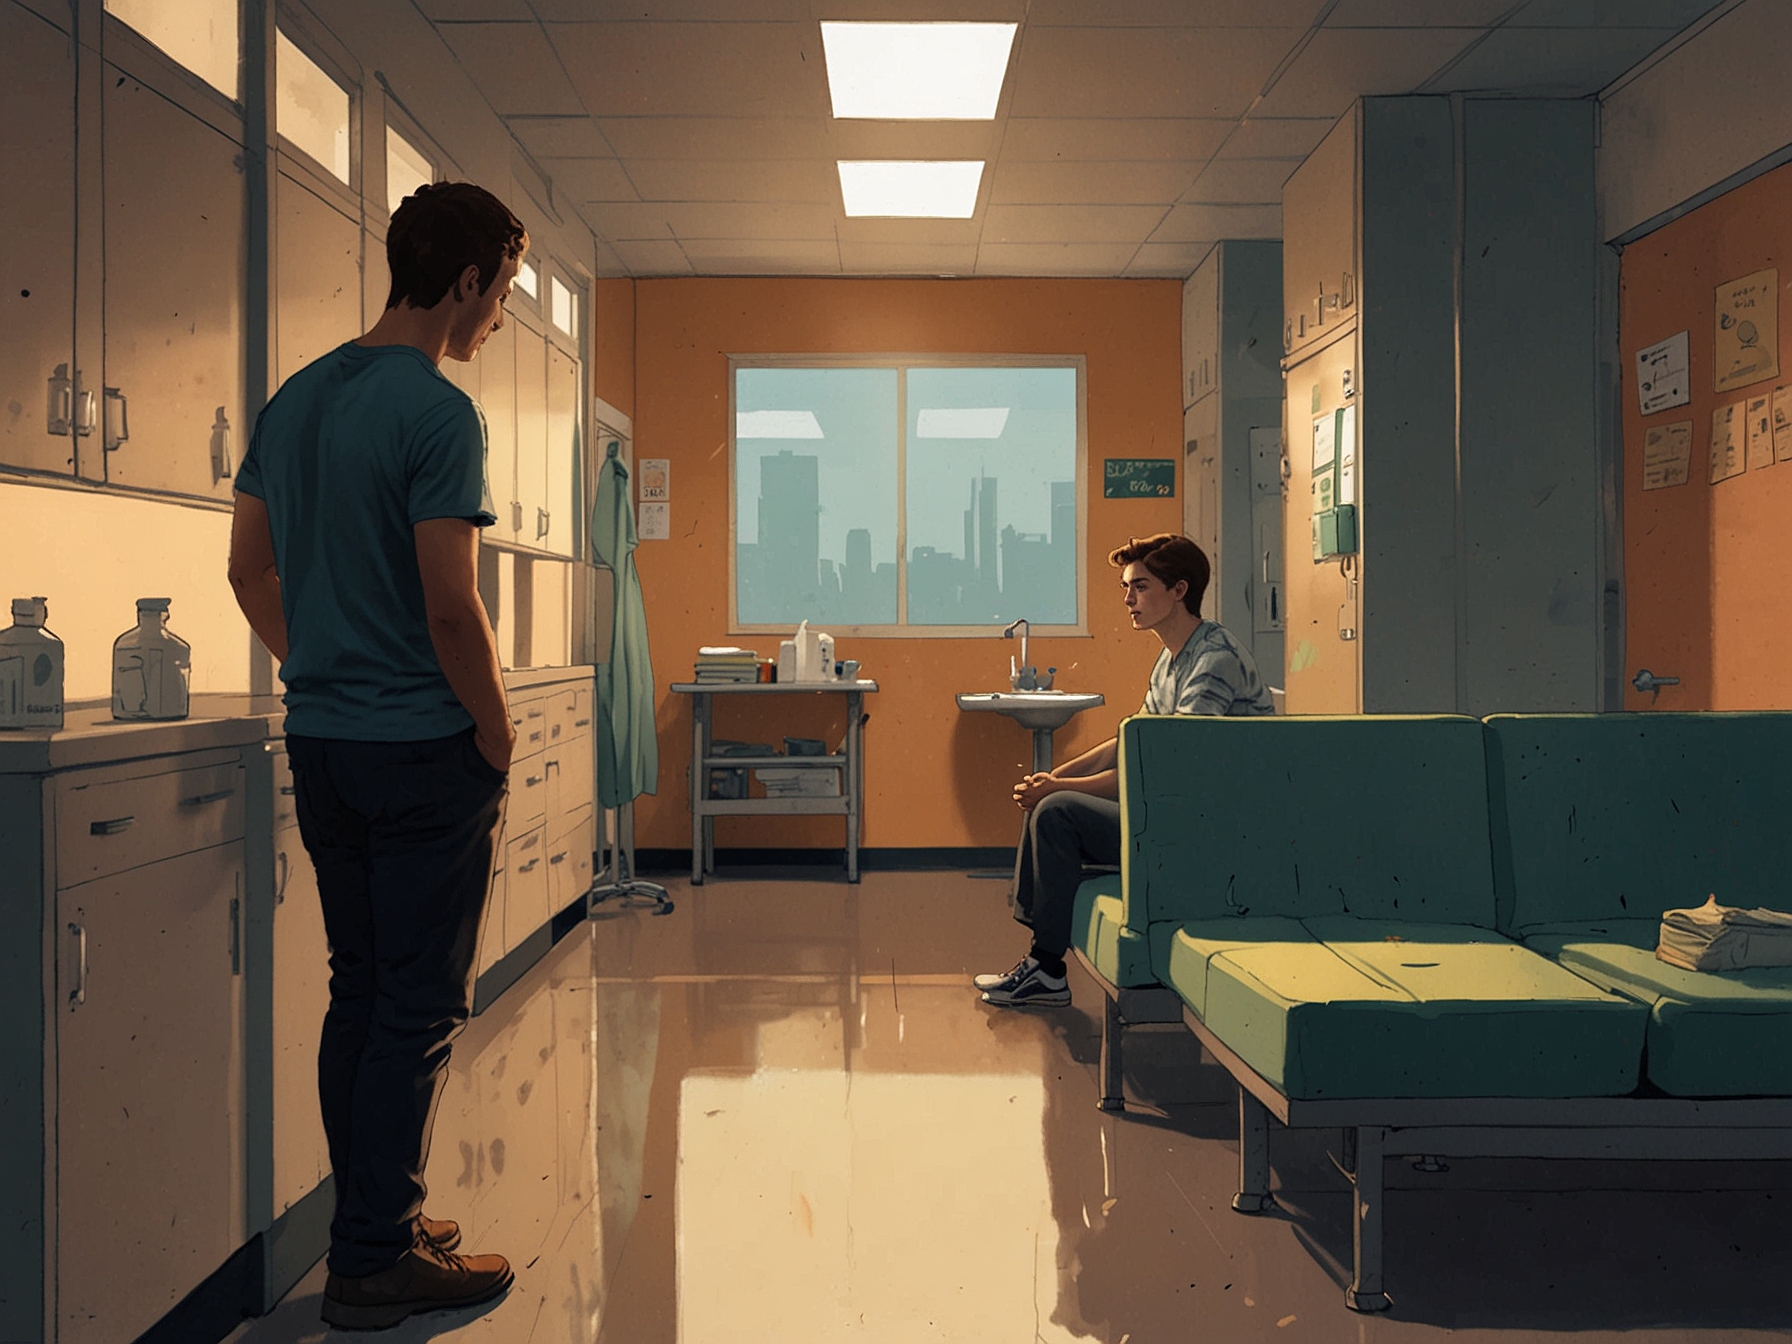 A touching scene in the hospital breakroom where Dylan Keogh and the newcomer share a rare moment of vulnerability, hinting at a growing romantic connection.